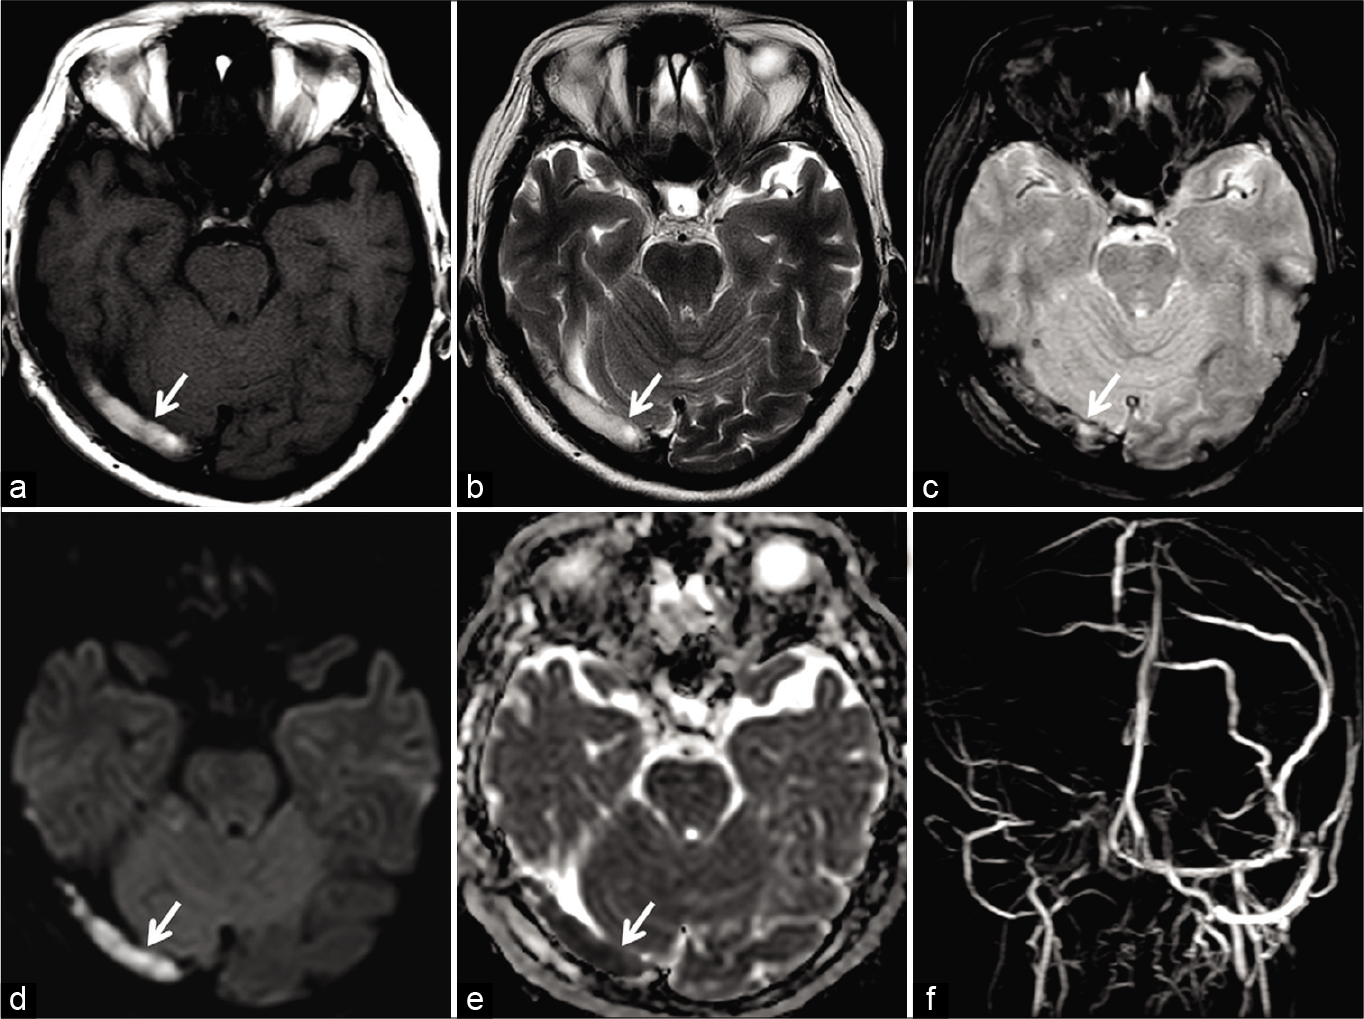 Magnetic resonance (MR) appearance of subacute dural sinus thrombosis in a 50-year-old patient. Unenhanced axial T1W image (a) and axial T2W image (b) show hyperintense signal within the right transverse sinus (arrow). Axial gradient recalled echo image (c) shows “blooming” artifact in the right transverse sinus (arrow). Restricted diffusion is also noted on the diffusion-weighted imaging image (d) andapparent diffusion coefficient image (e). Occlusion was confirmed on the phase-contrast MR venography (f).